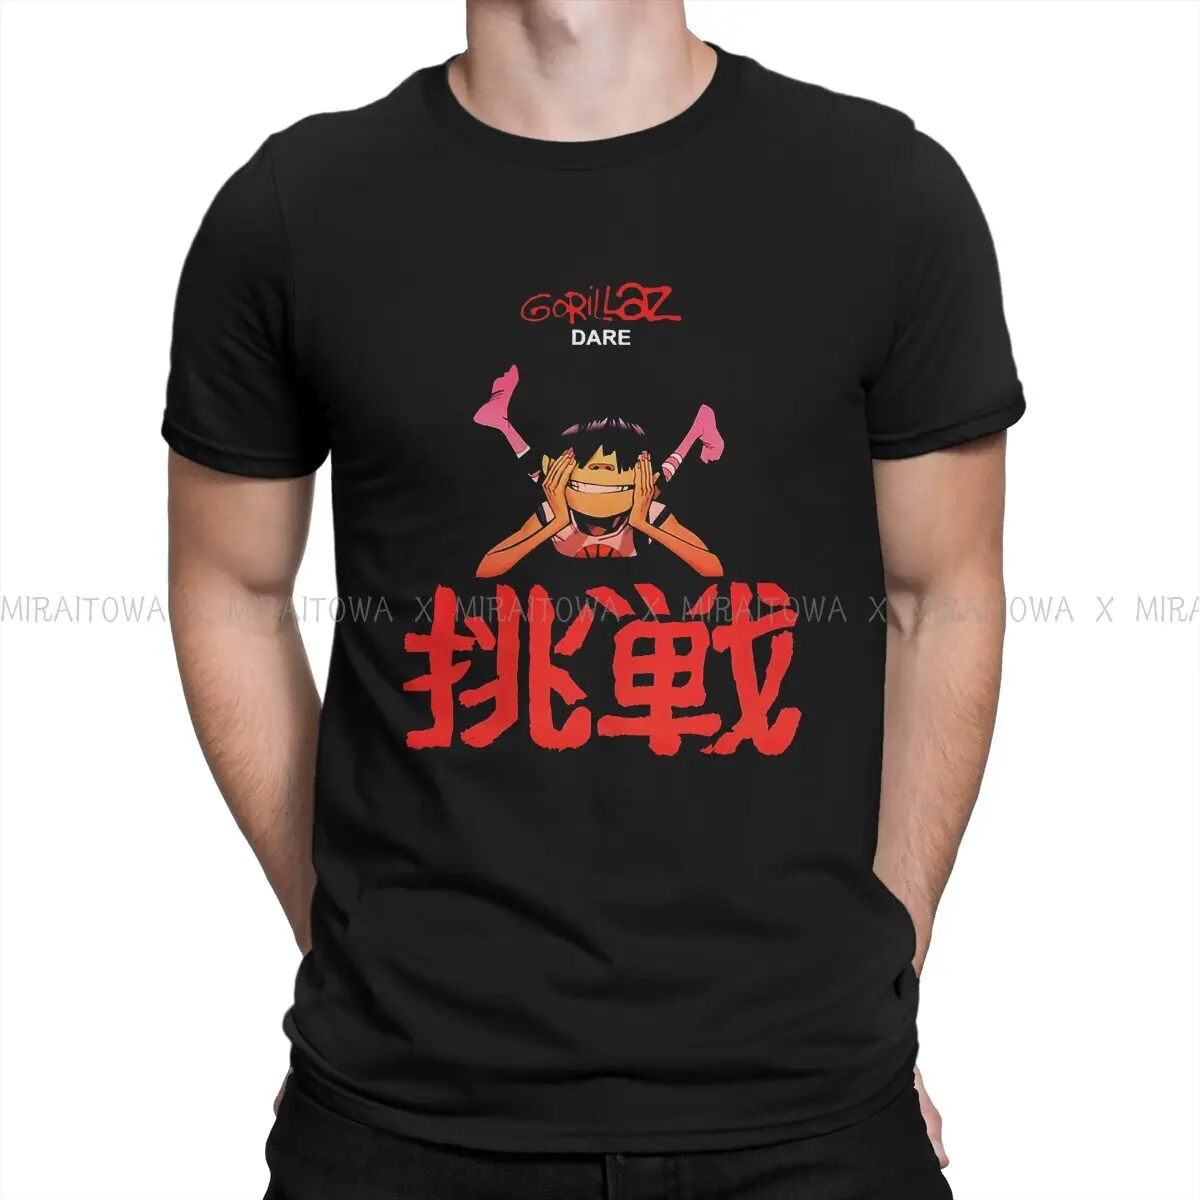 Dare TShirt For Male Gorillaz Virtual Band Tops Style T Shirt Comfortable Print Fluffy Creative Gift